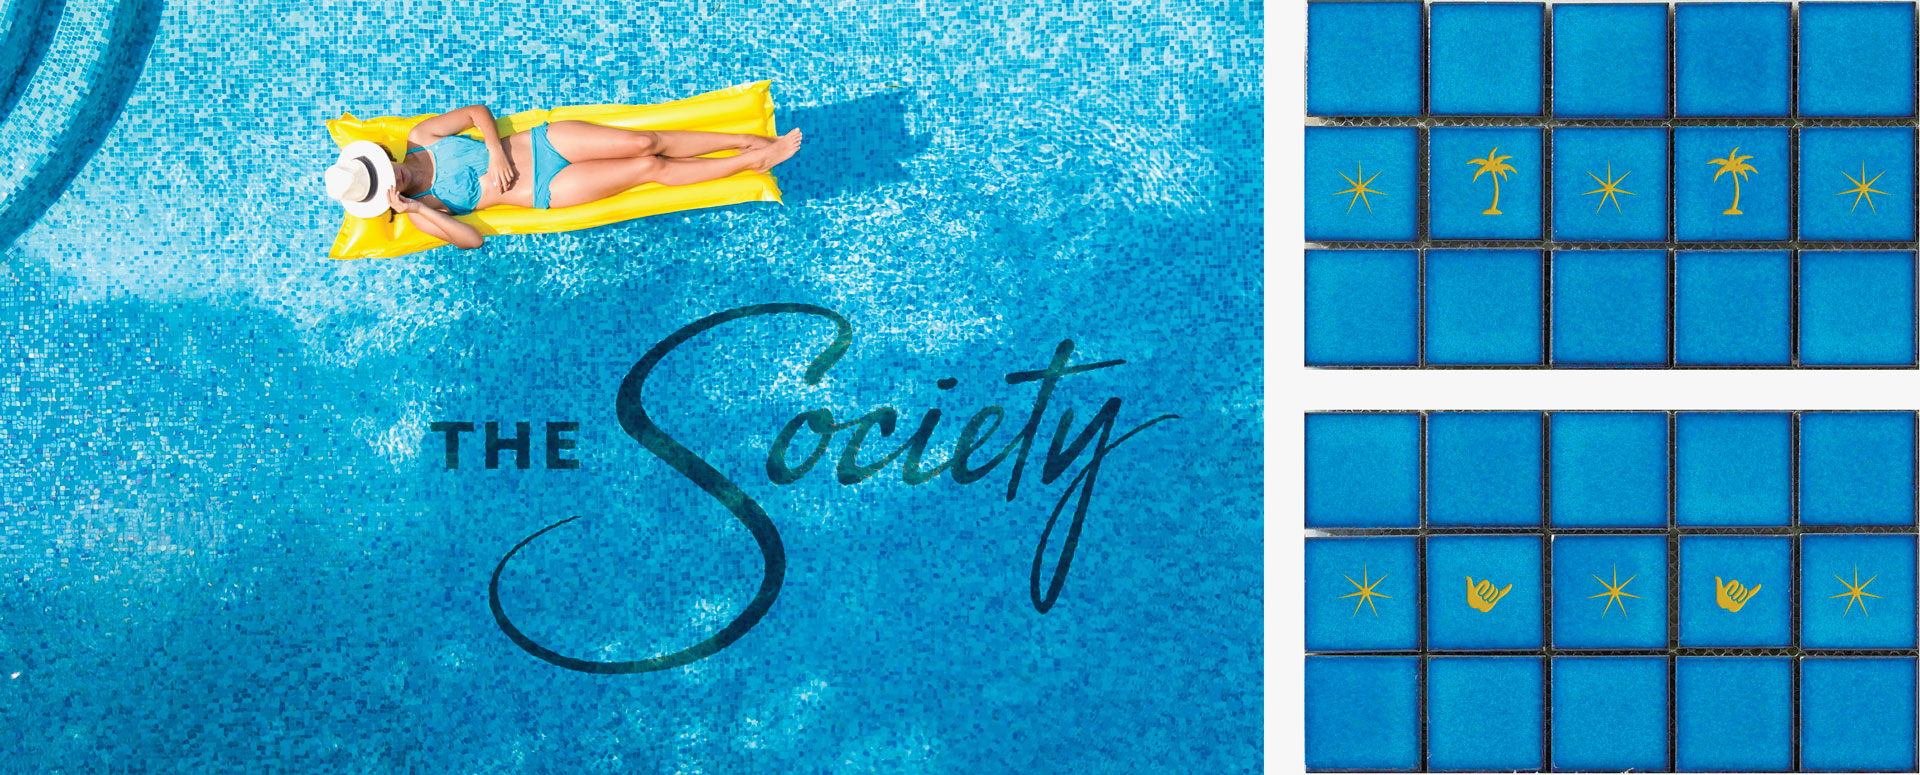 The Society apartments branding pool mockup created by Incubate Design for Holland Residential